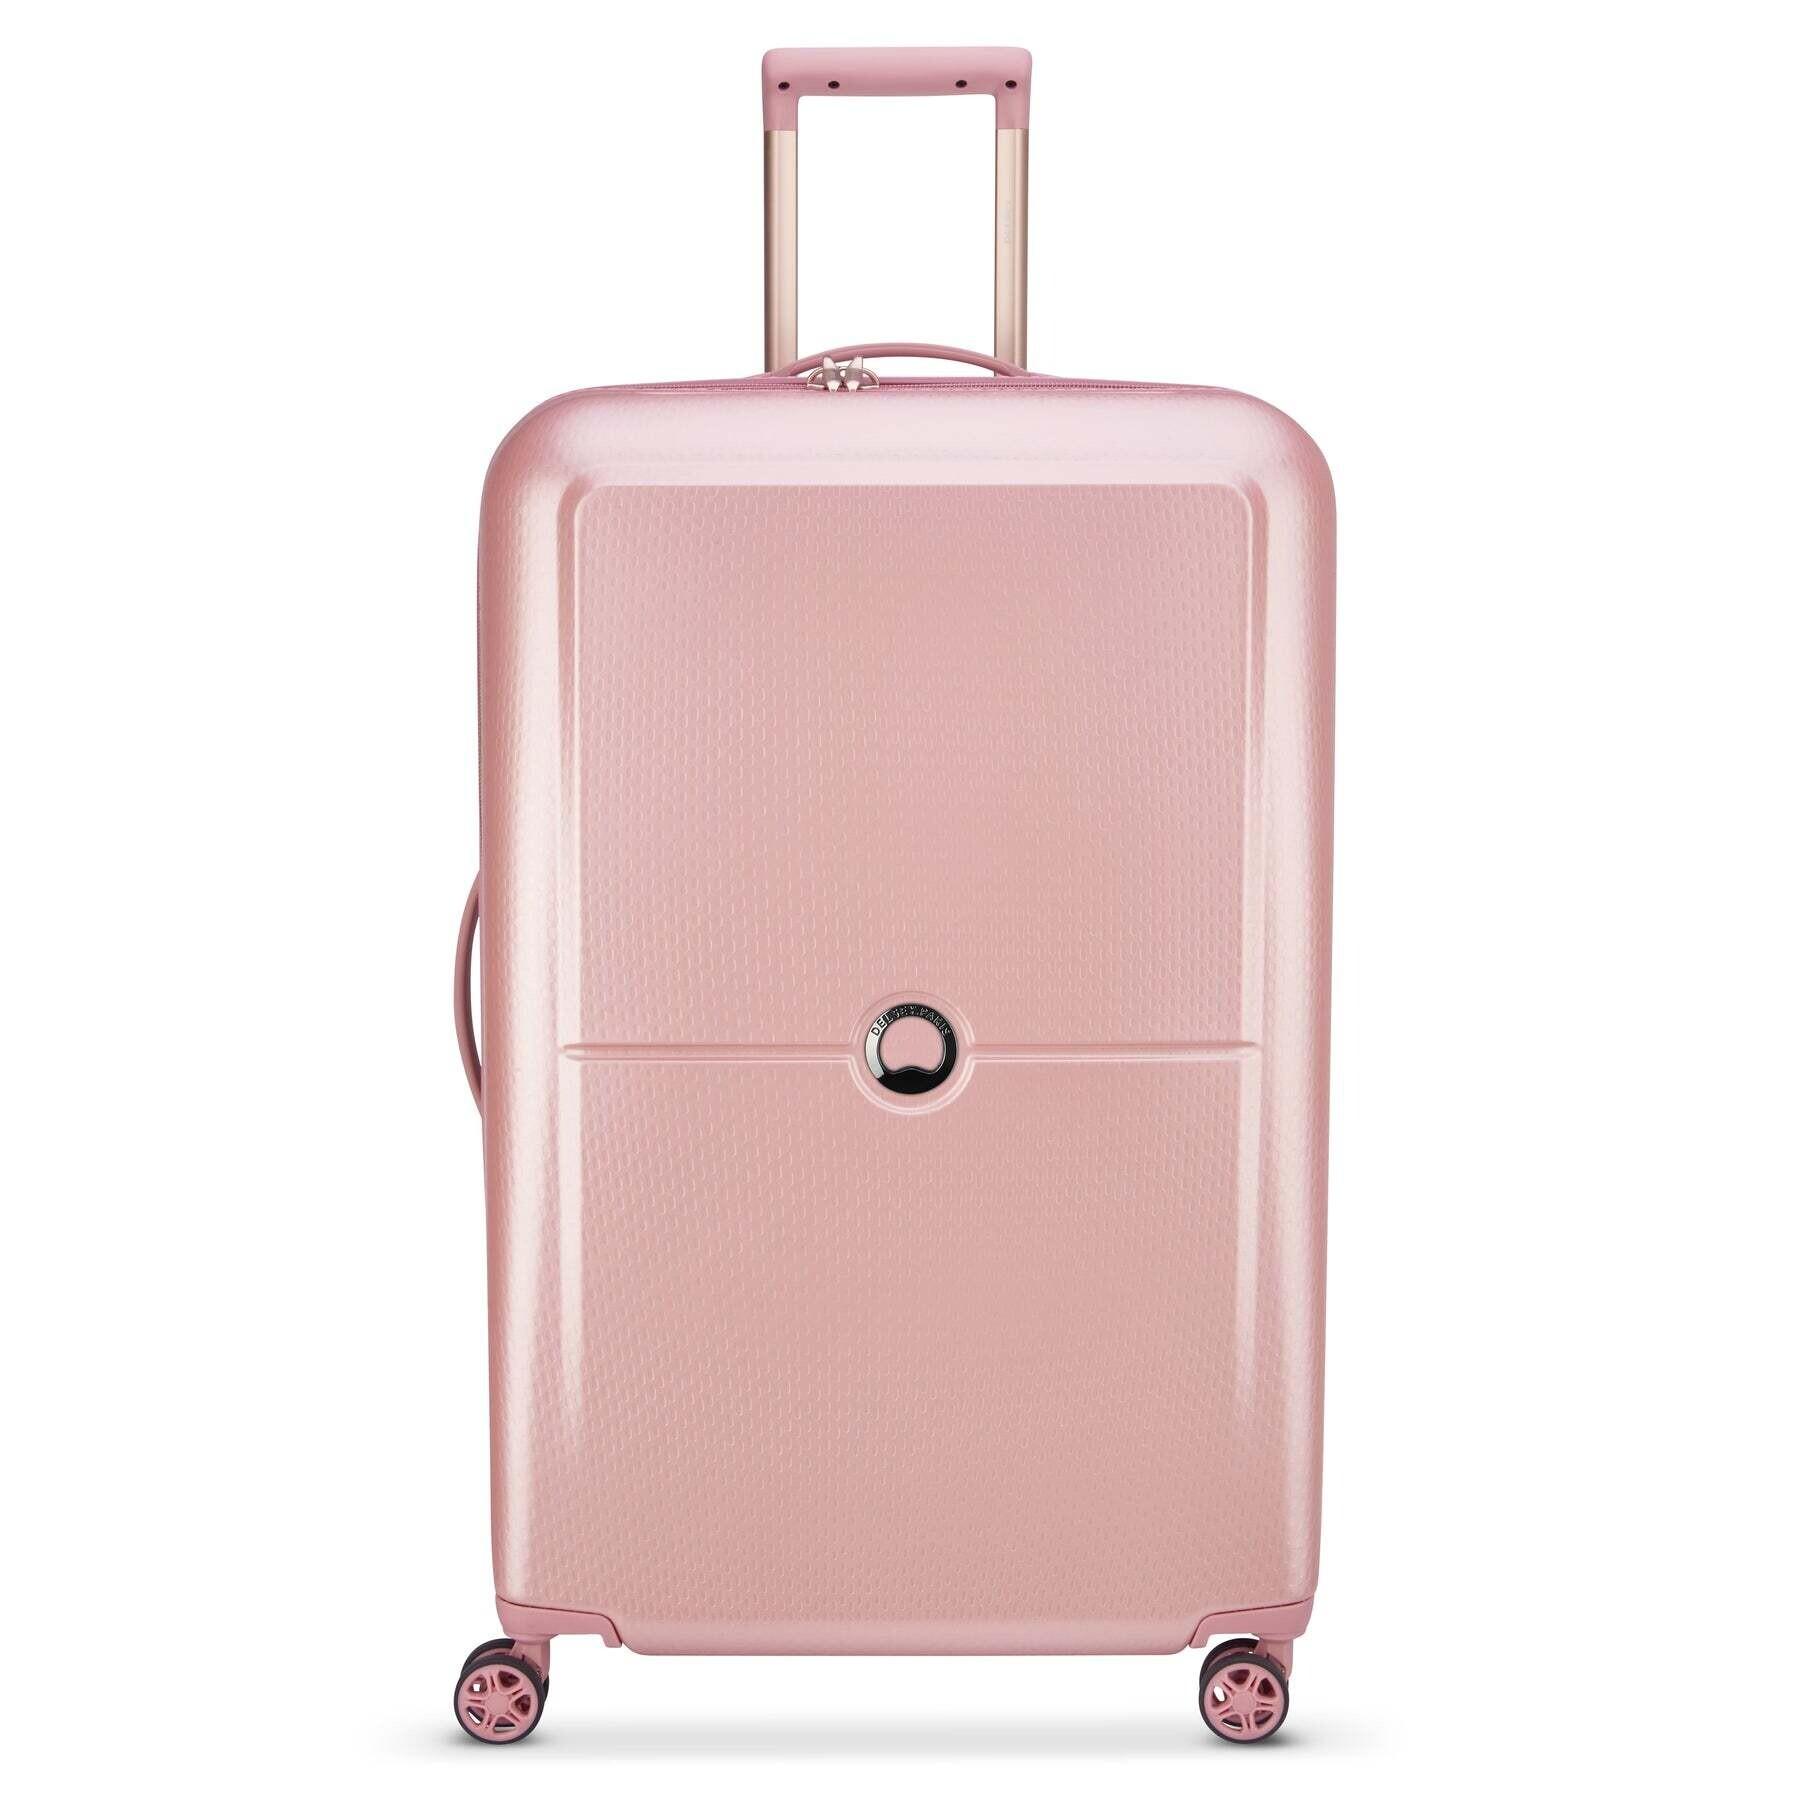 Valise trolley 4 doubles roues Delsey Turenne 75 cm - Valise - Bagagerie -  Accessoires